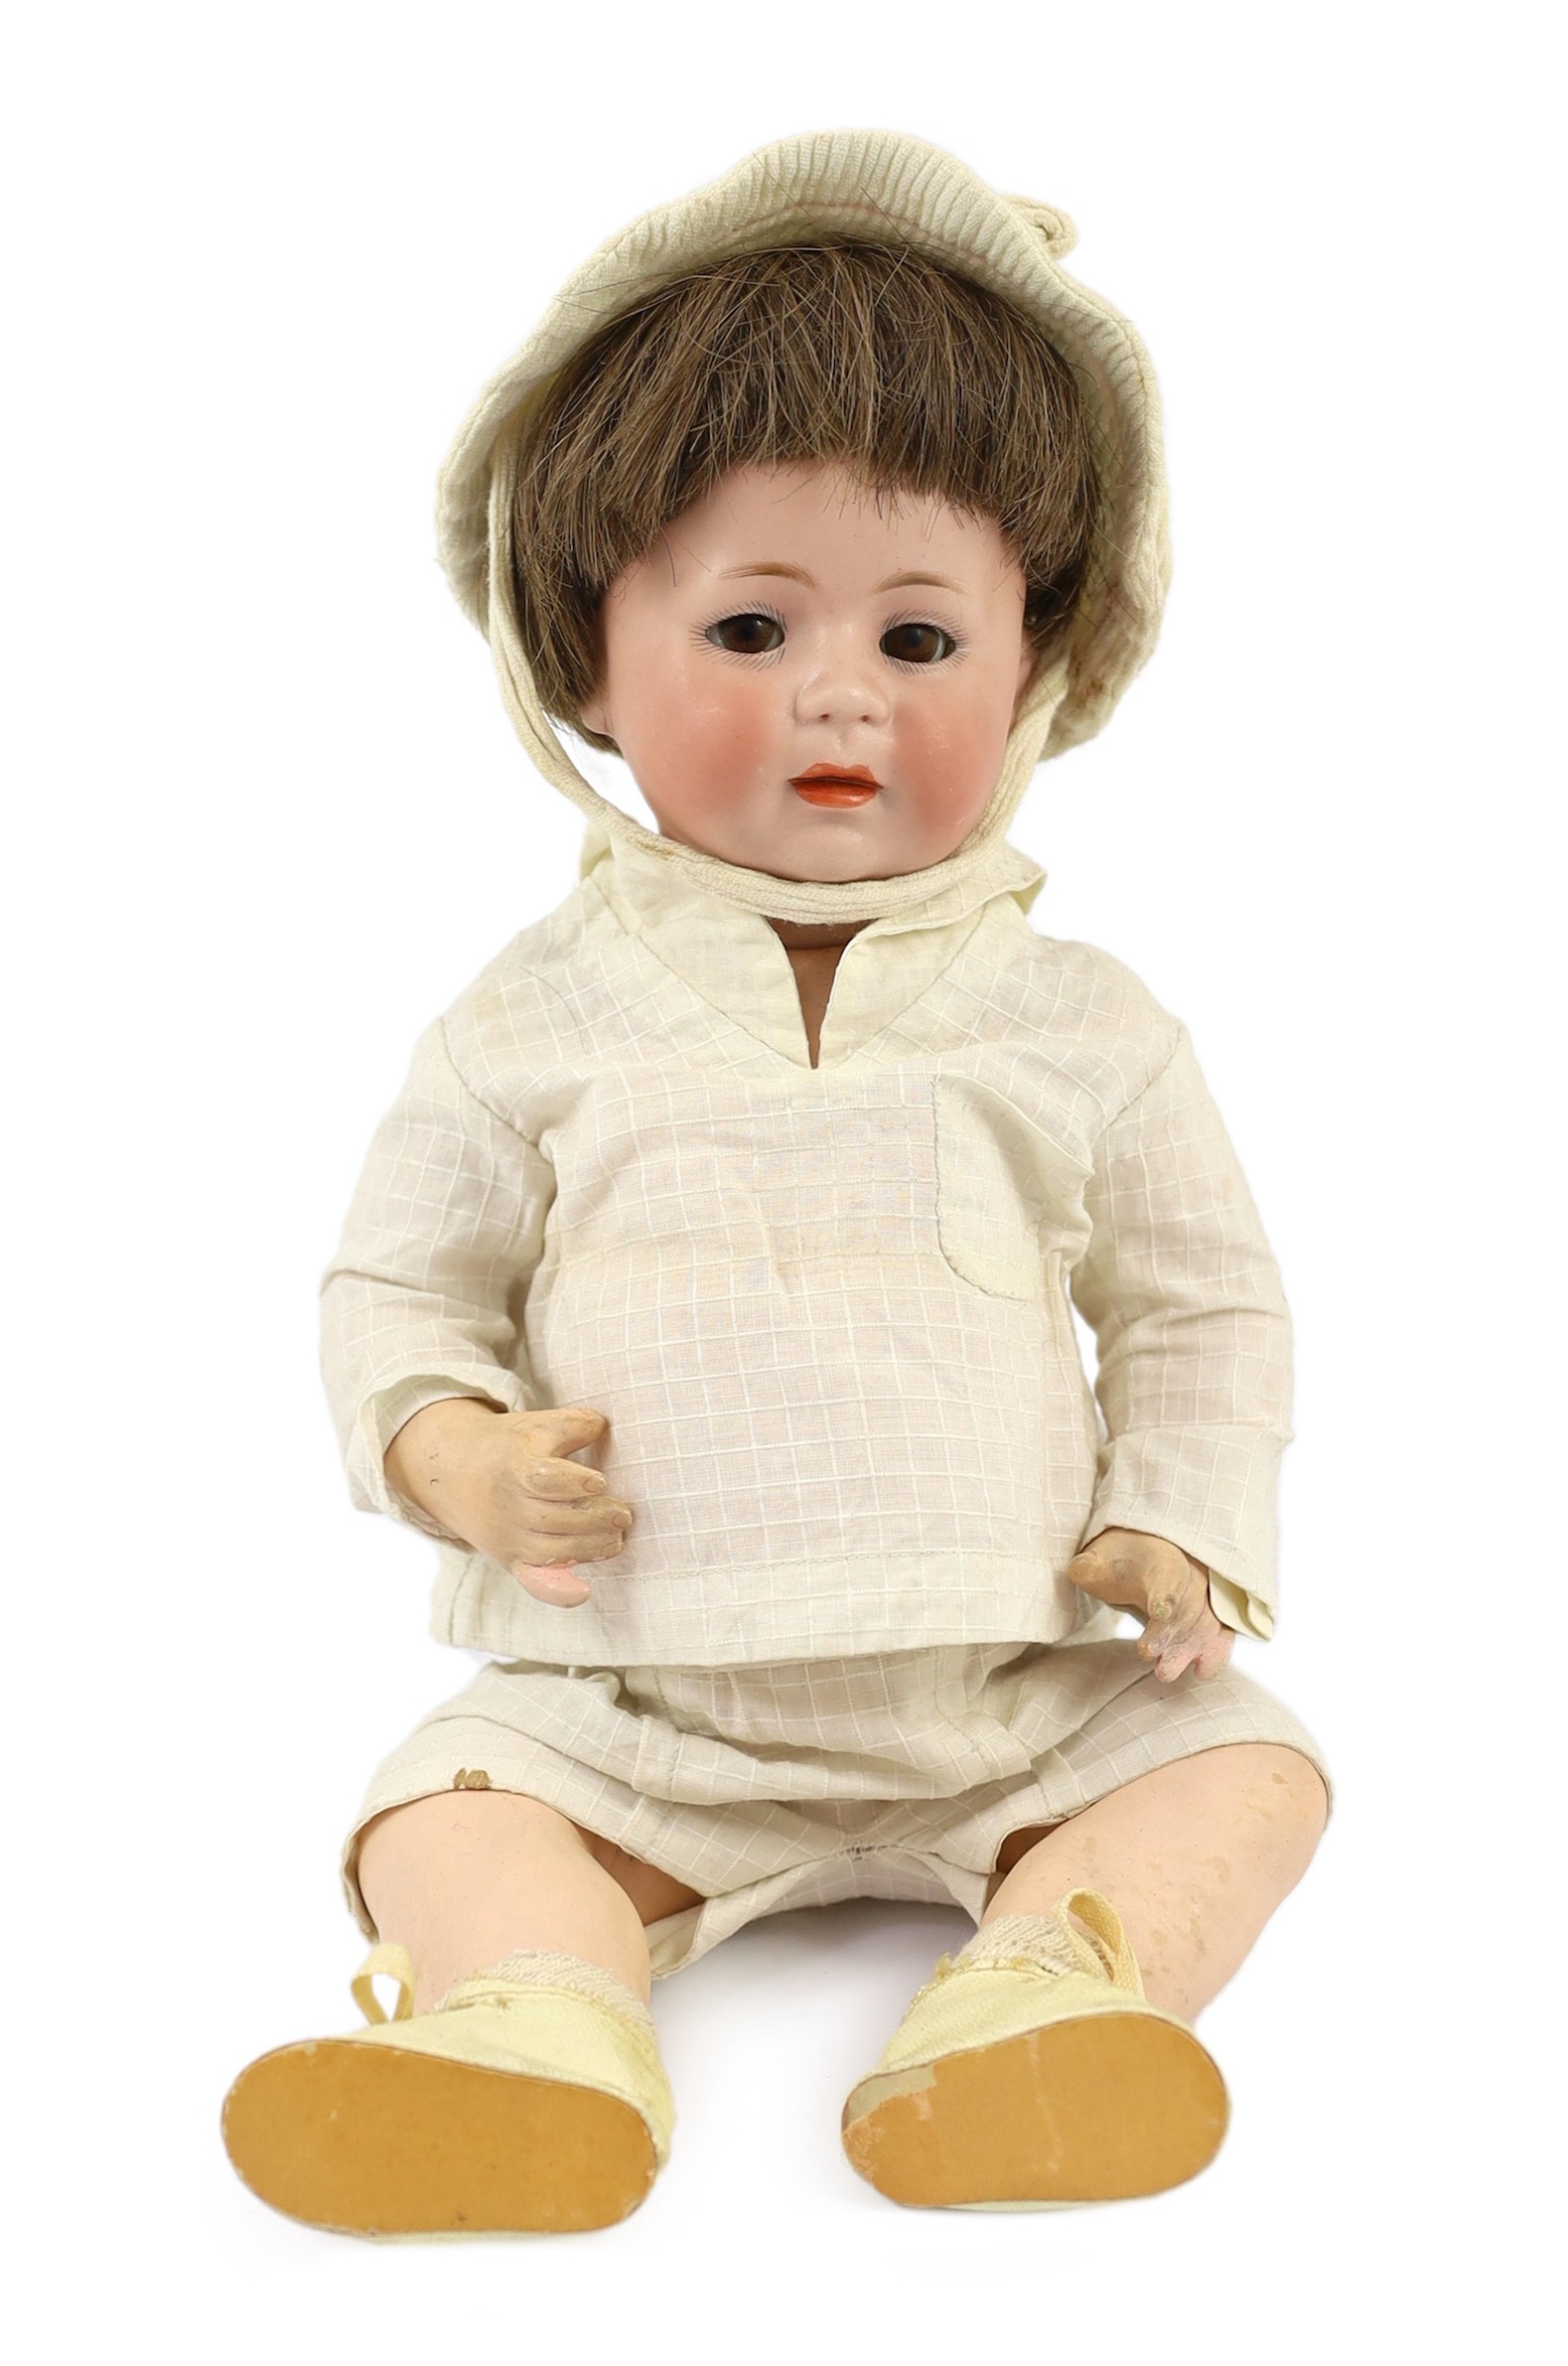 A Simon & Halbig bisque character doll, German, circa 1920, 13.25in.                                                                                                                                                        